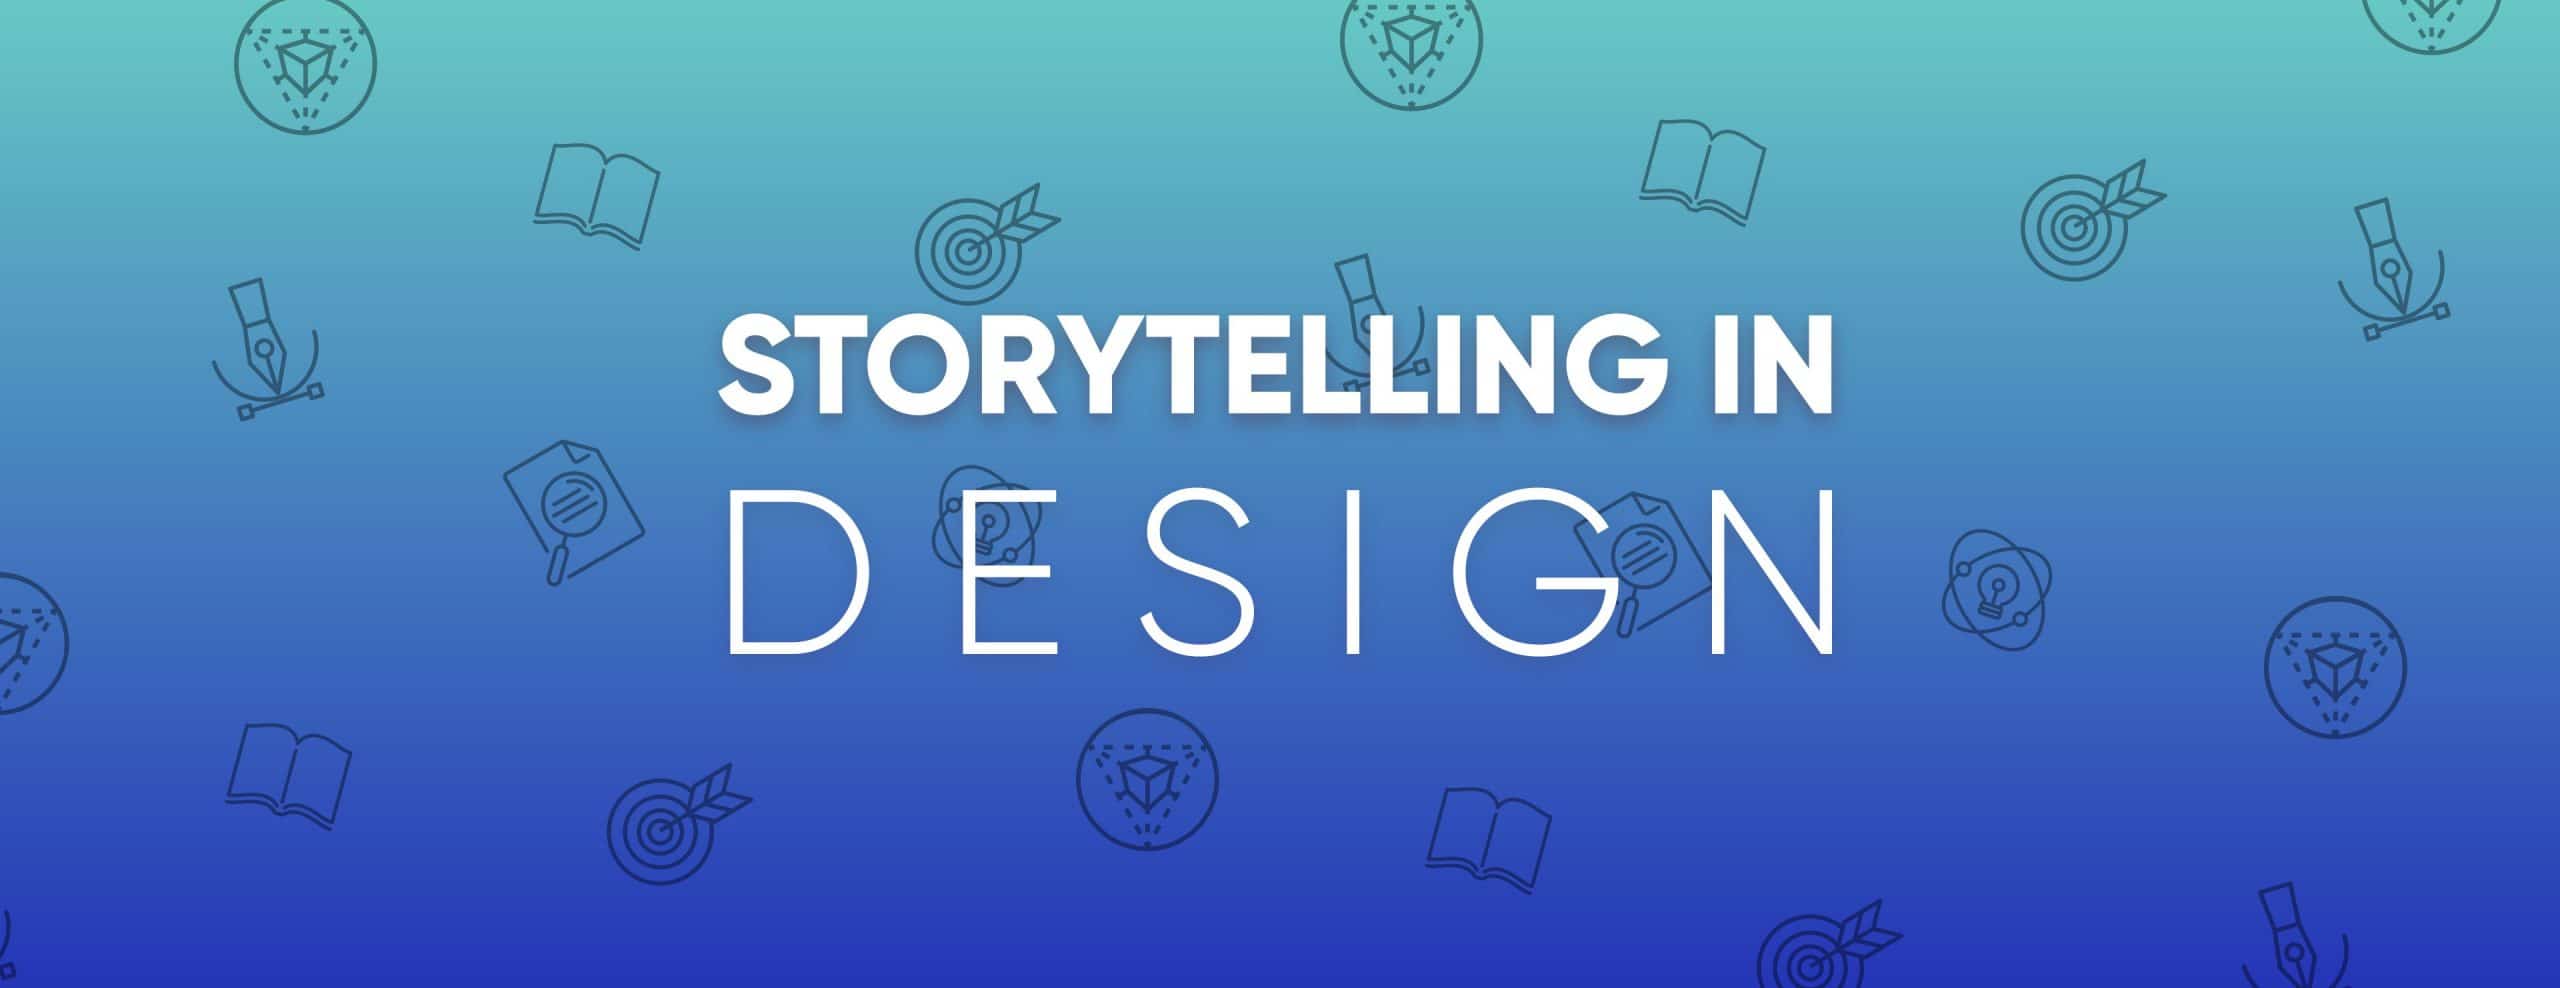 Storytelling by Designing Character